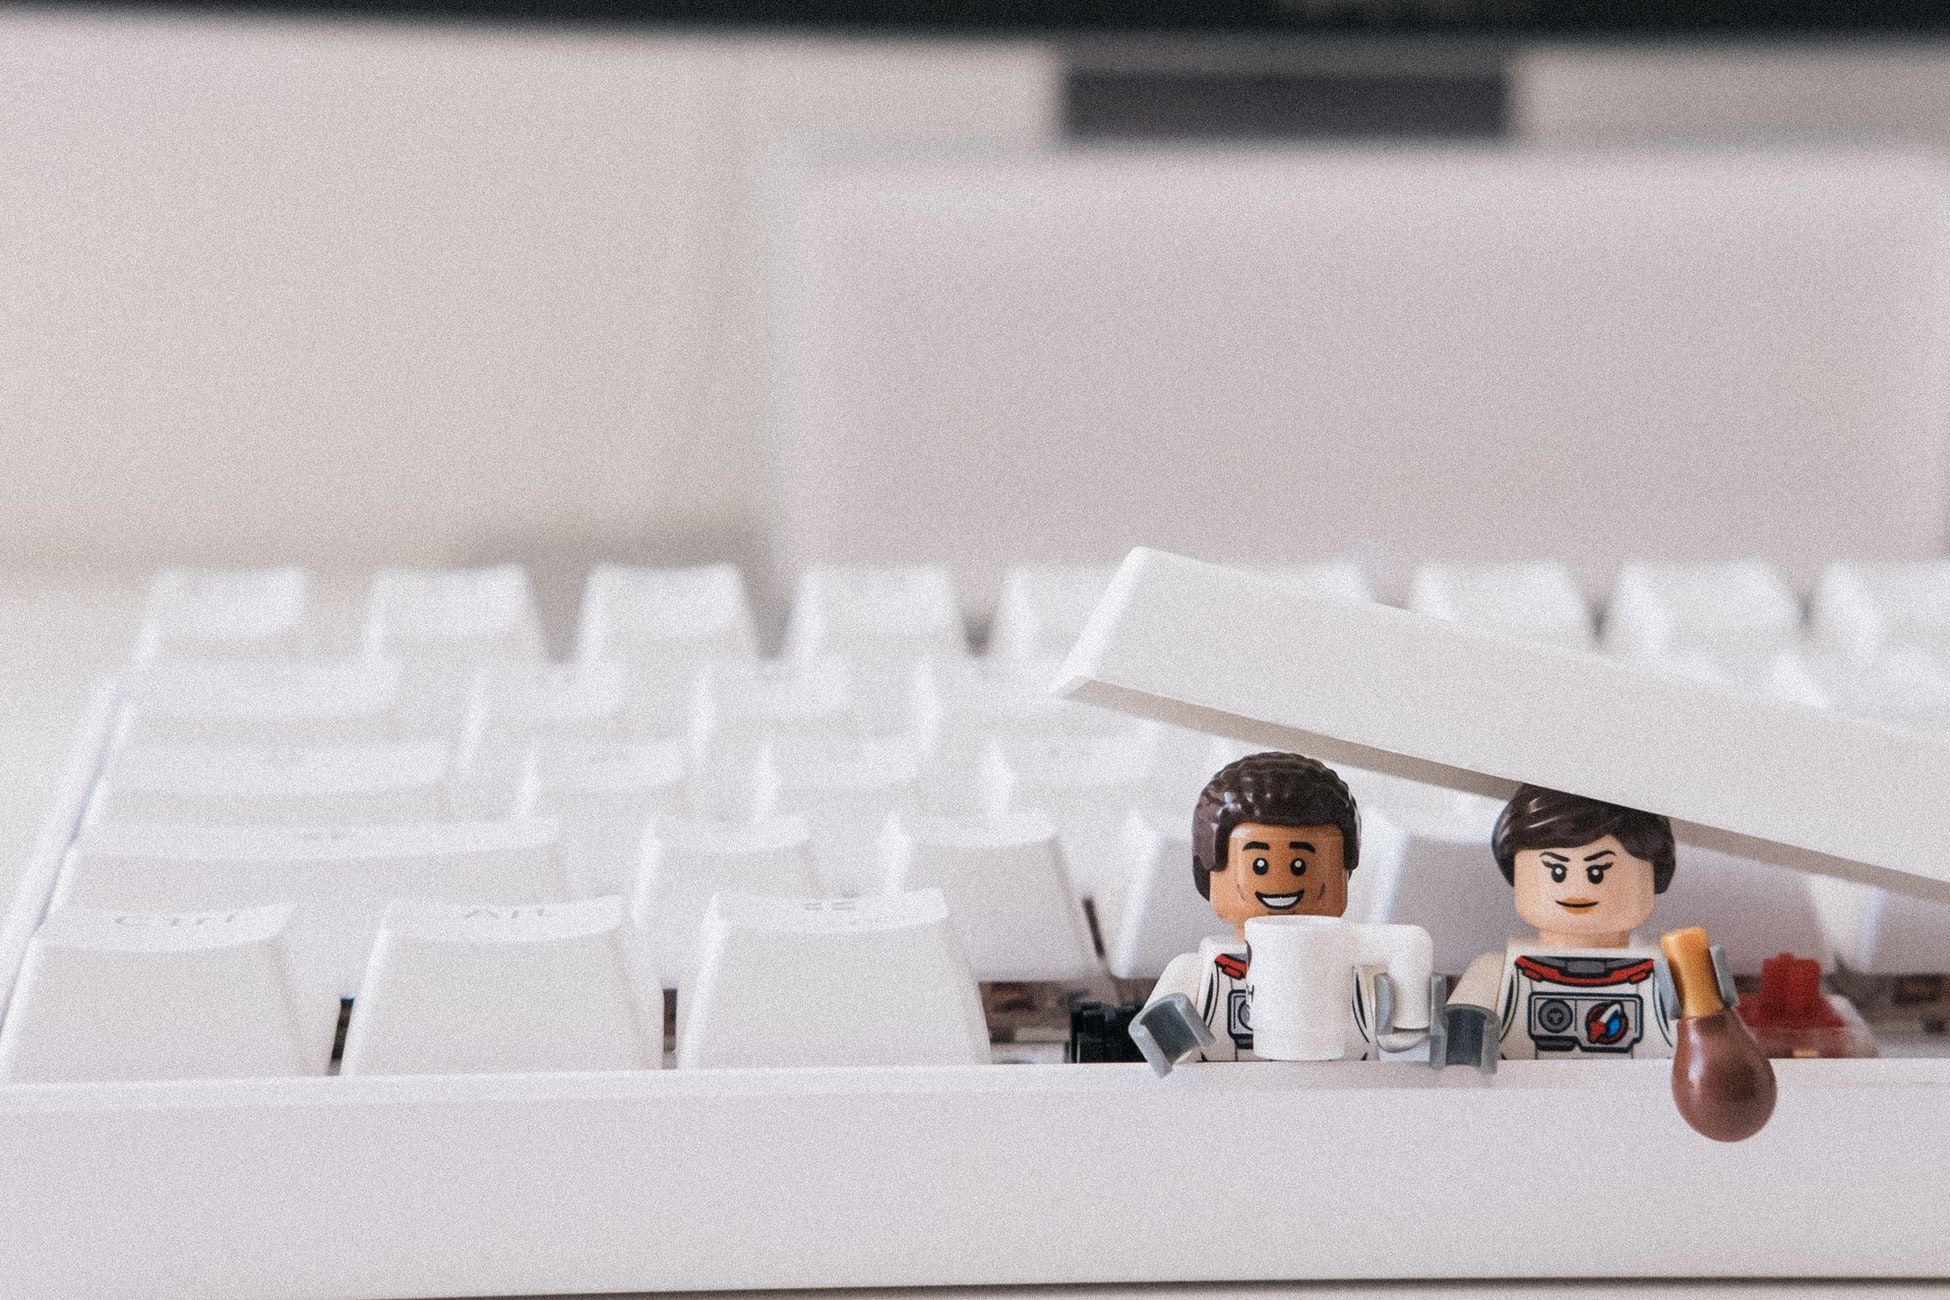 Two Lego people popping put from under a computer keyboard's keys